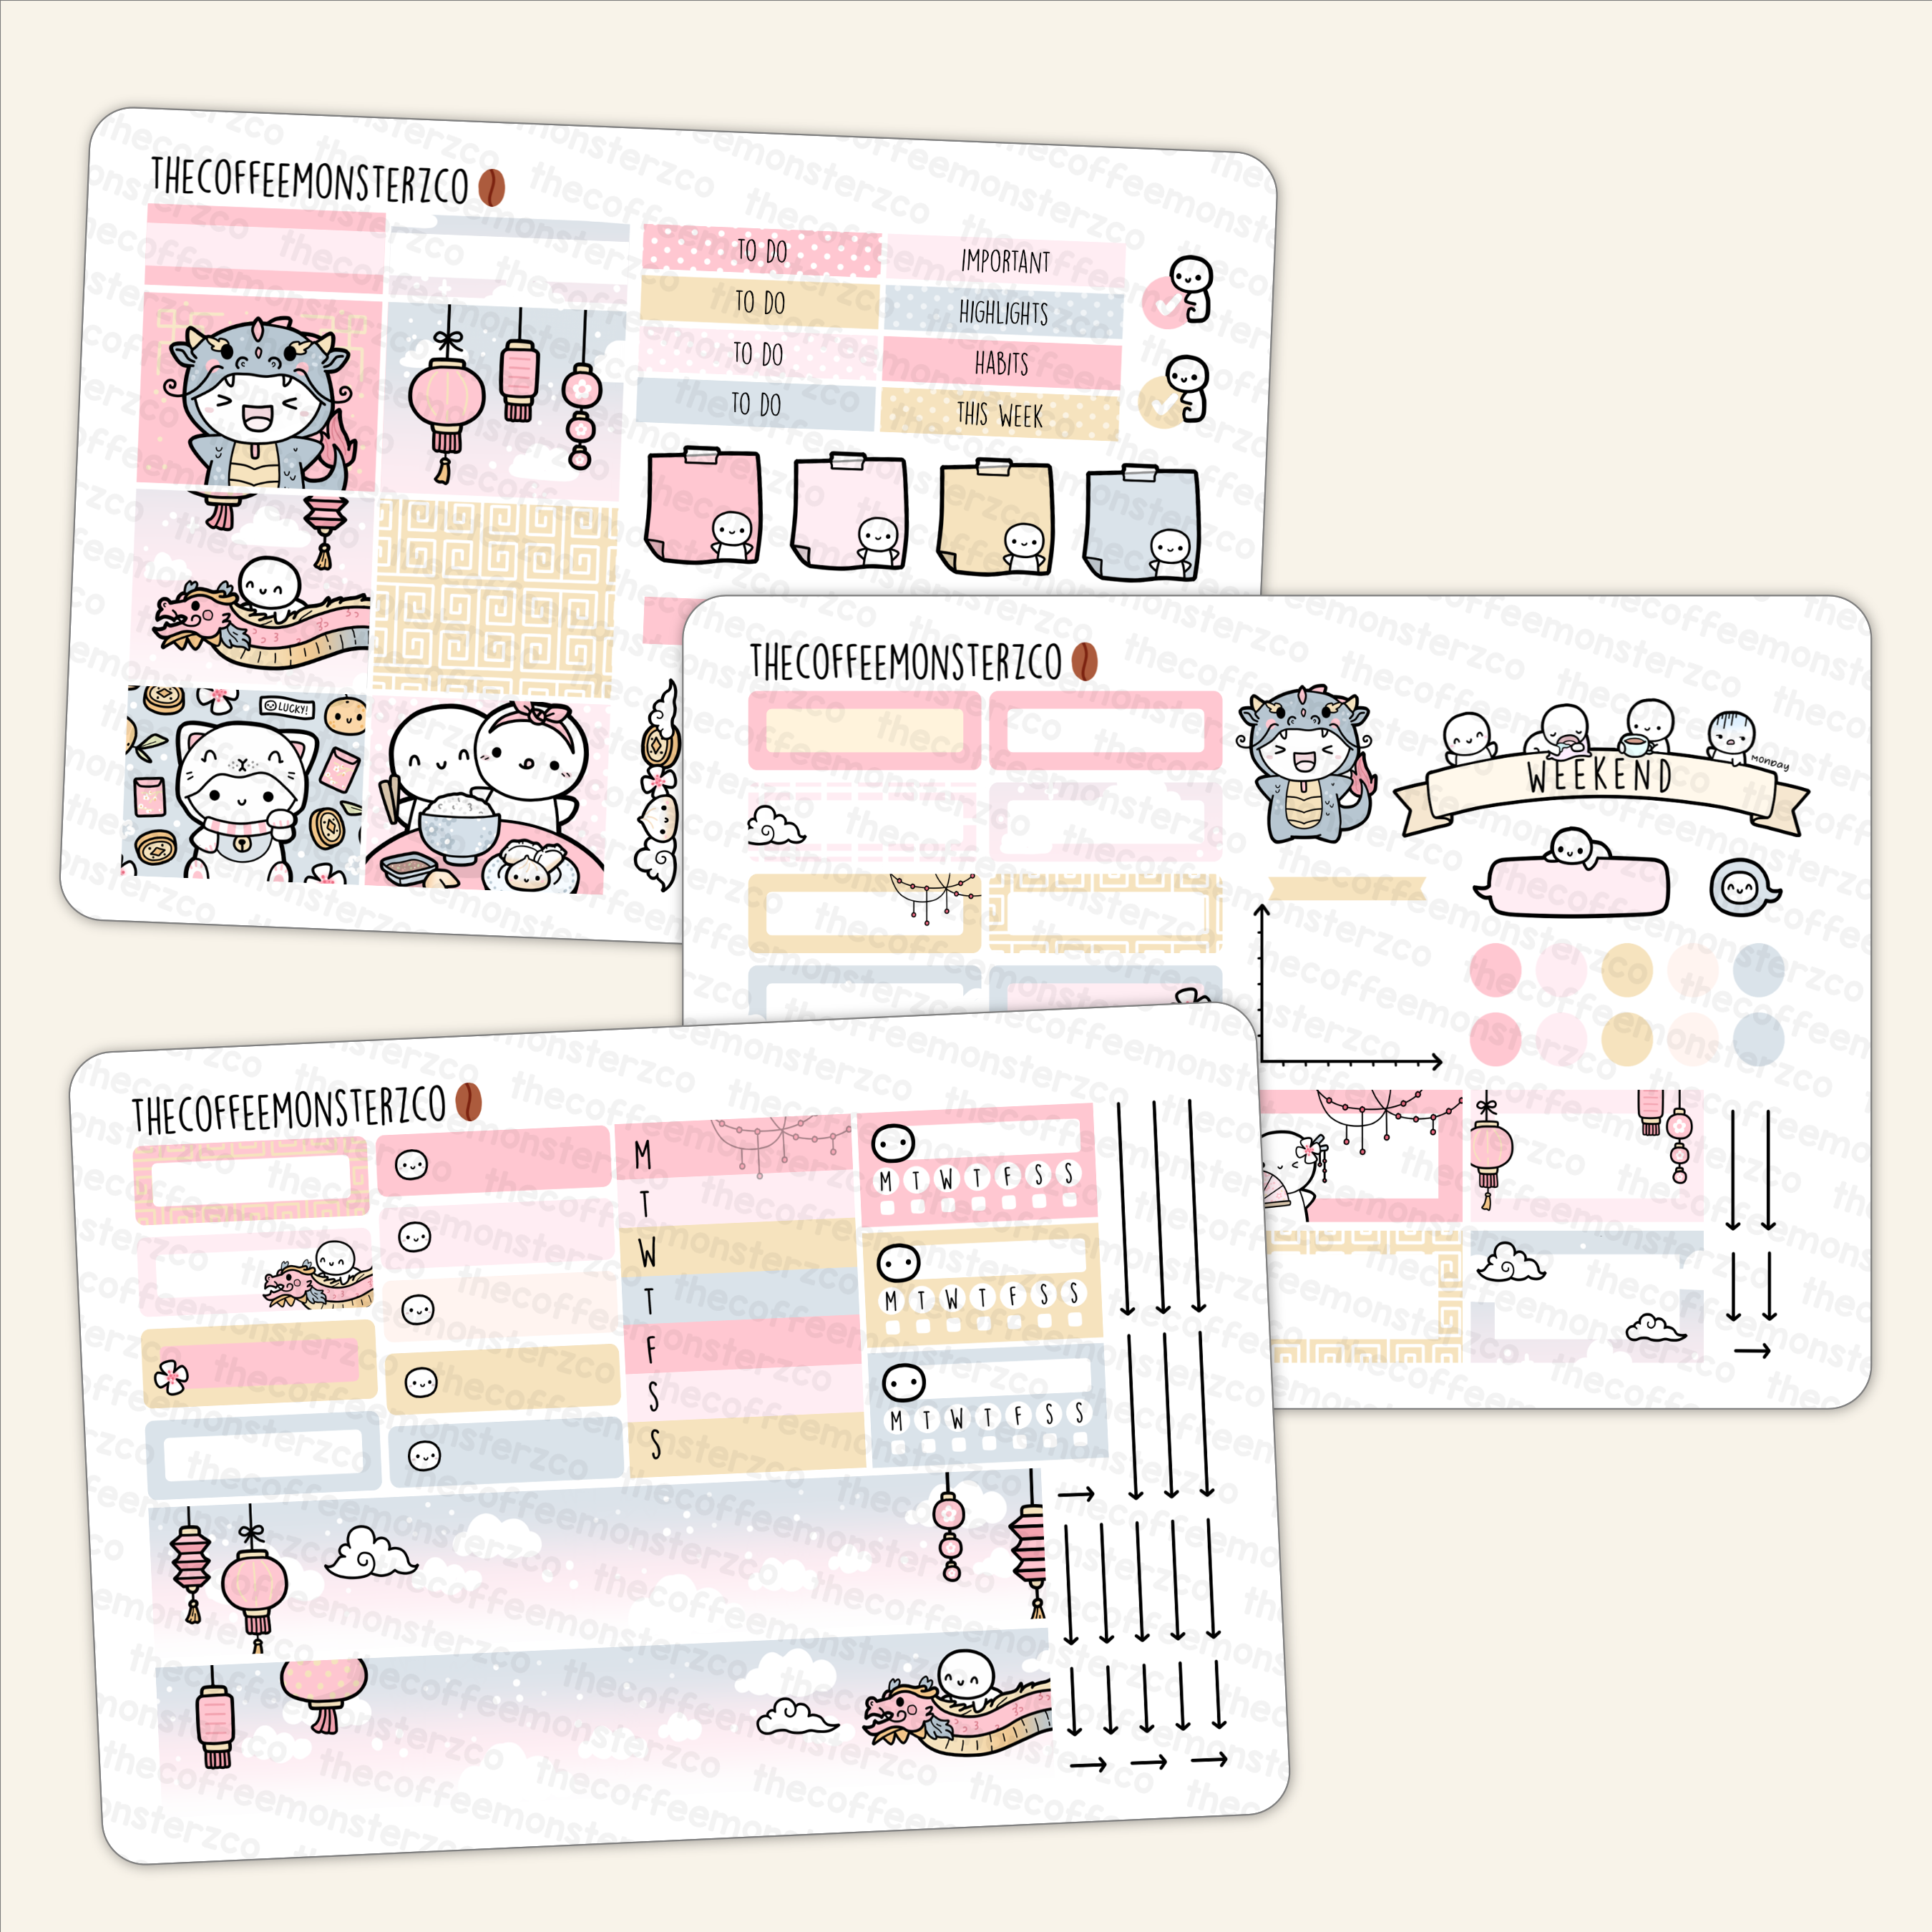 Hobonichi Cousin Monthly - February 2024 – Wonder Stickers Co.